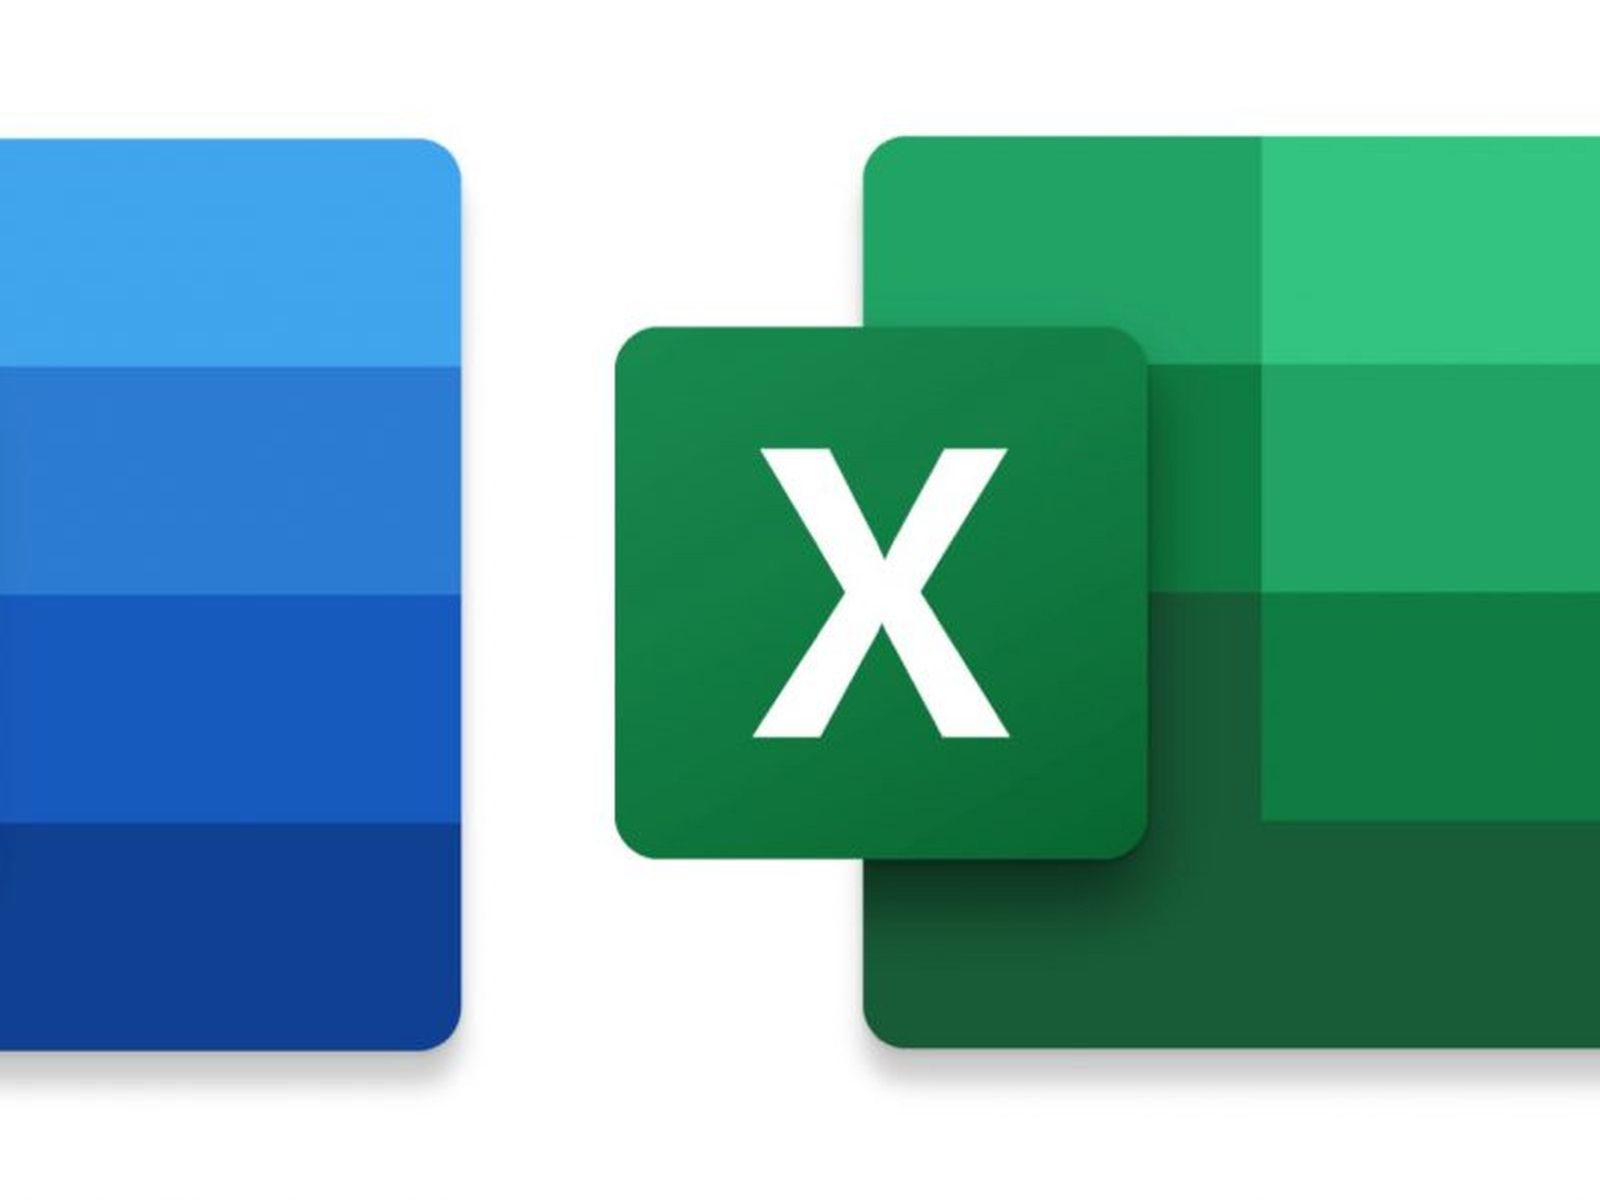 workspace on mac for excel